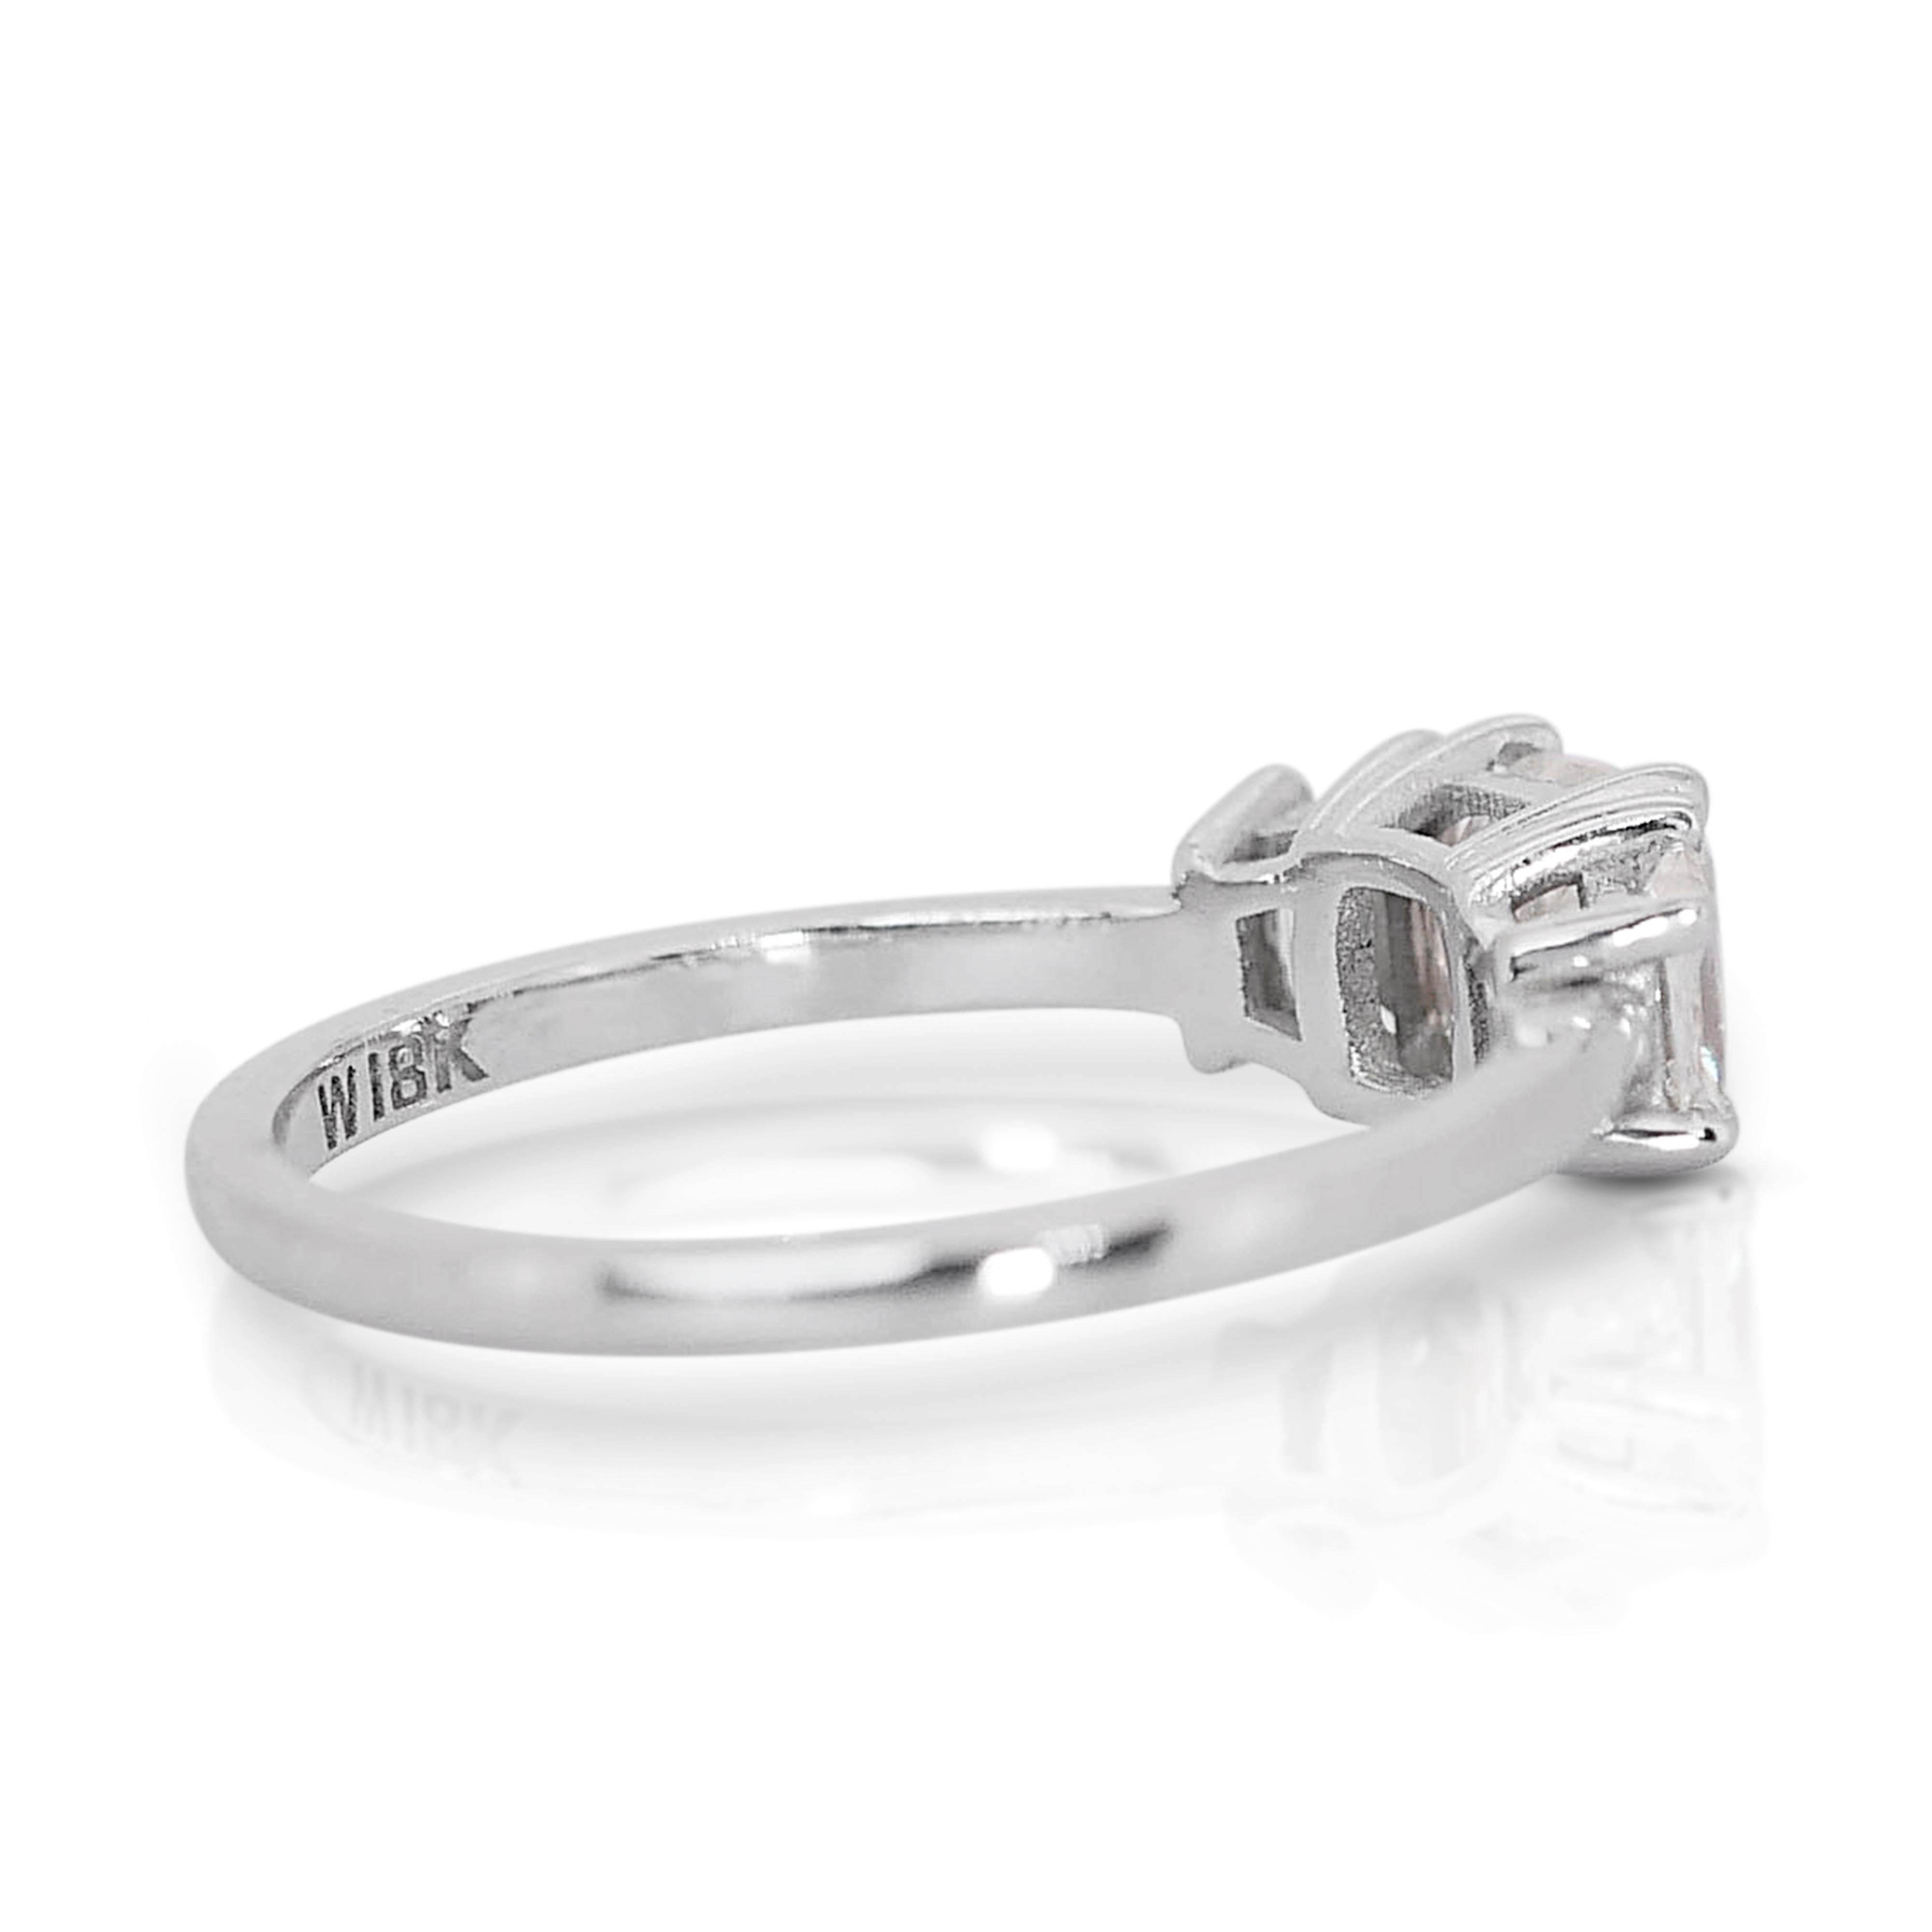 Brilliant Cut Exquisite 18K White Gold 3-Stone Diamond Ring with 1.24ct- GIA Certified  For Sale